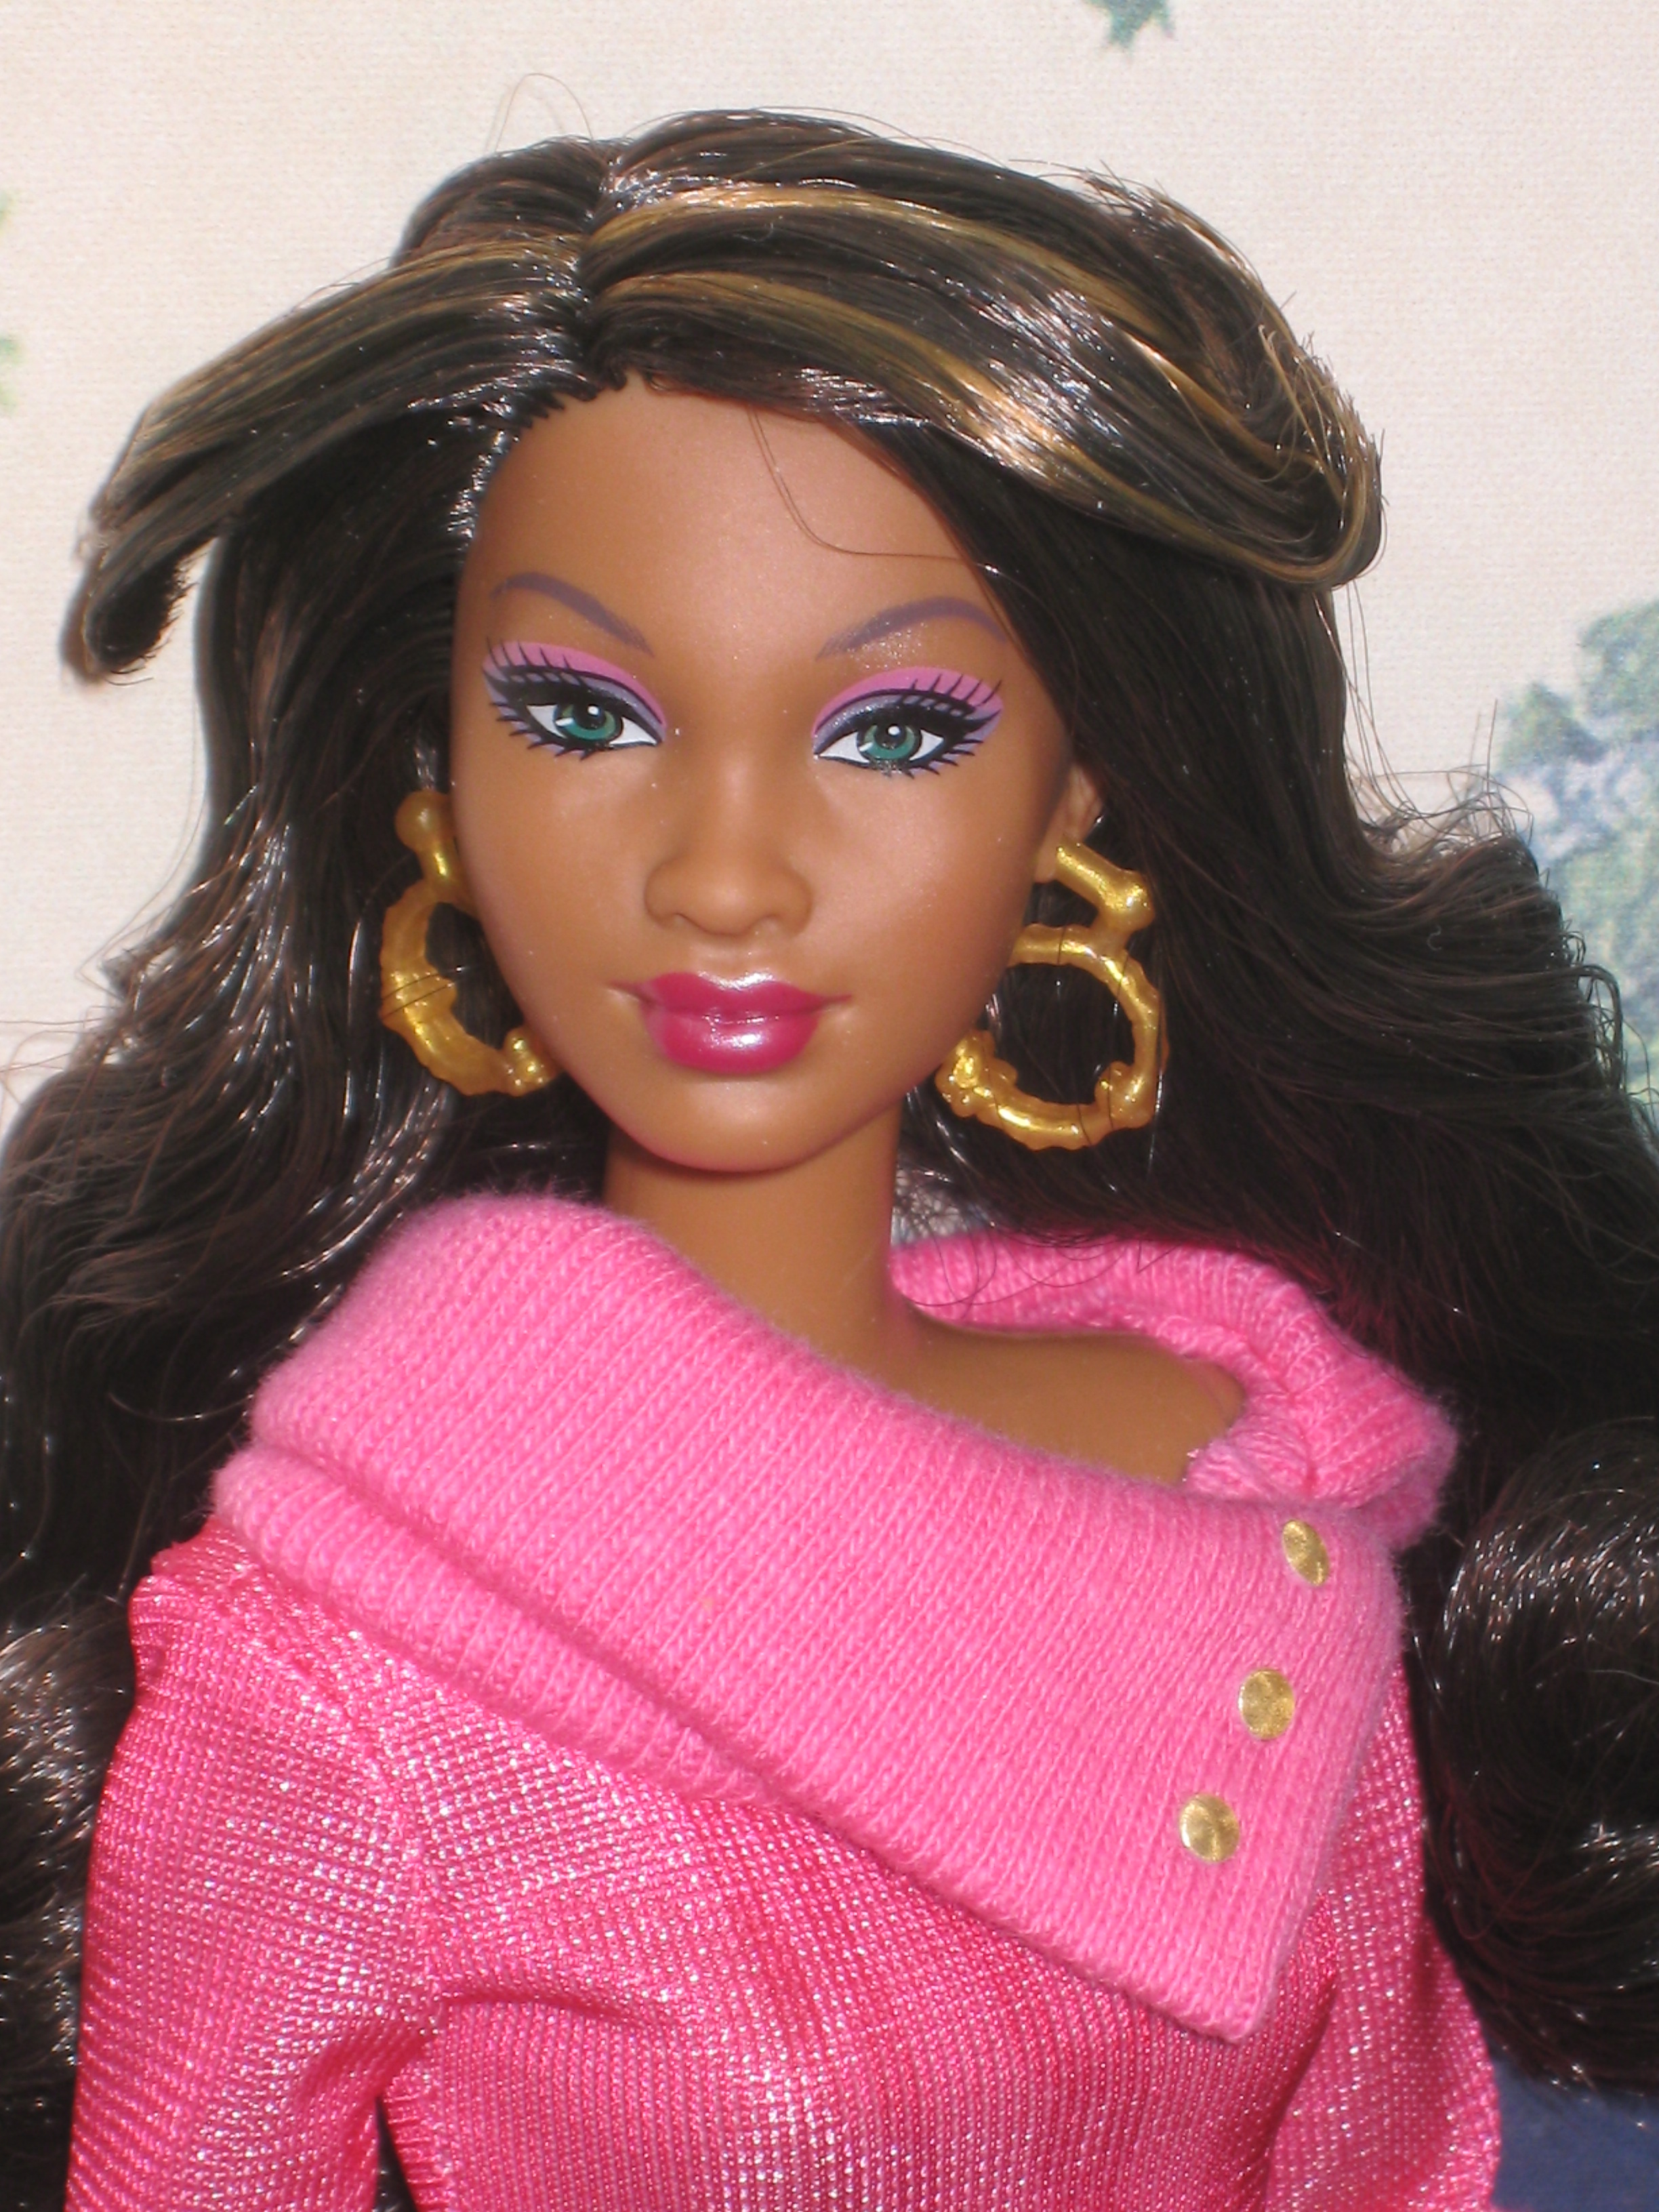 Barbie バービー So In Style Trichelle Doll 2012 人形 ドール